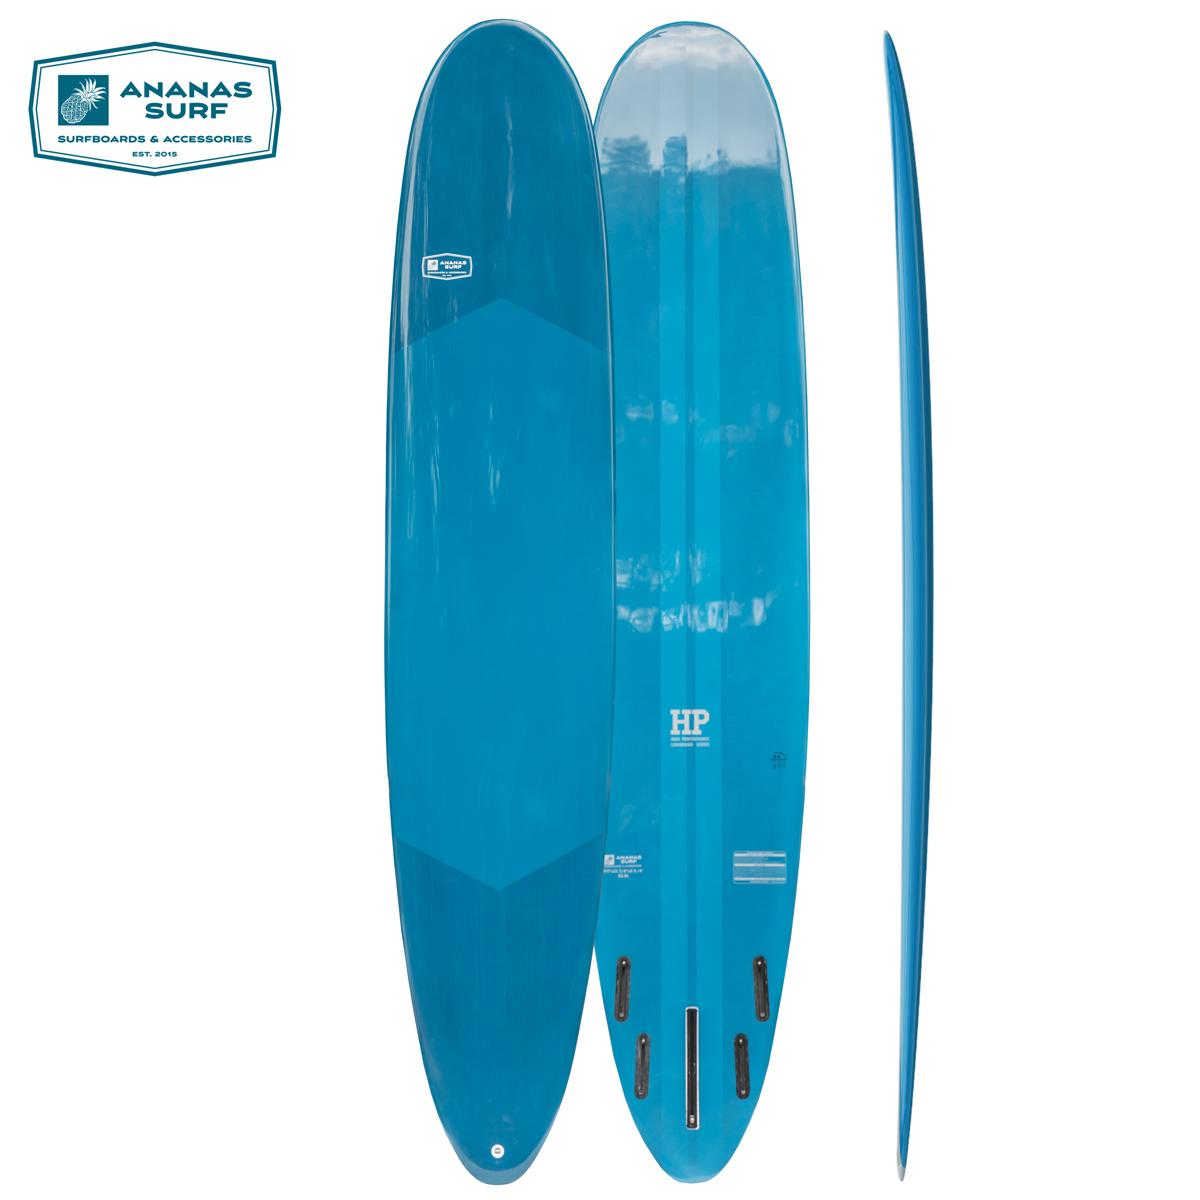 Ananas Surf High Perfomance longboard surfboard 2019 carbon blue